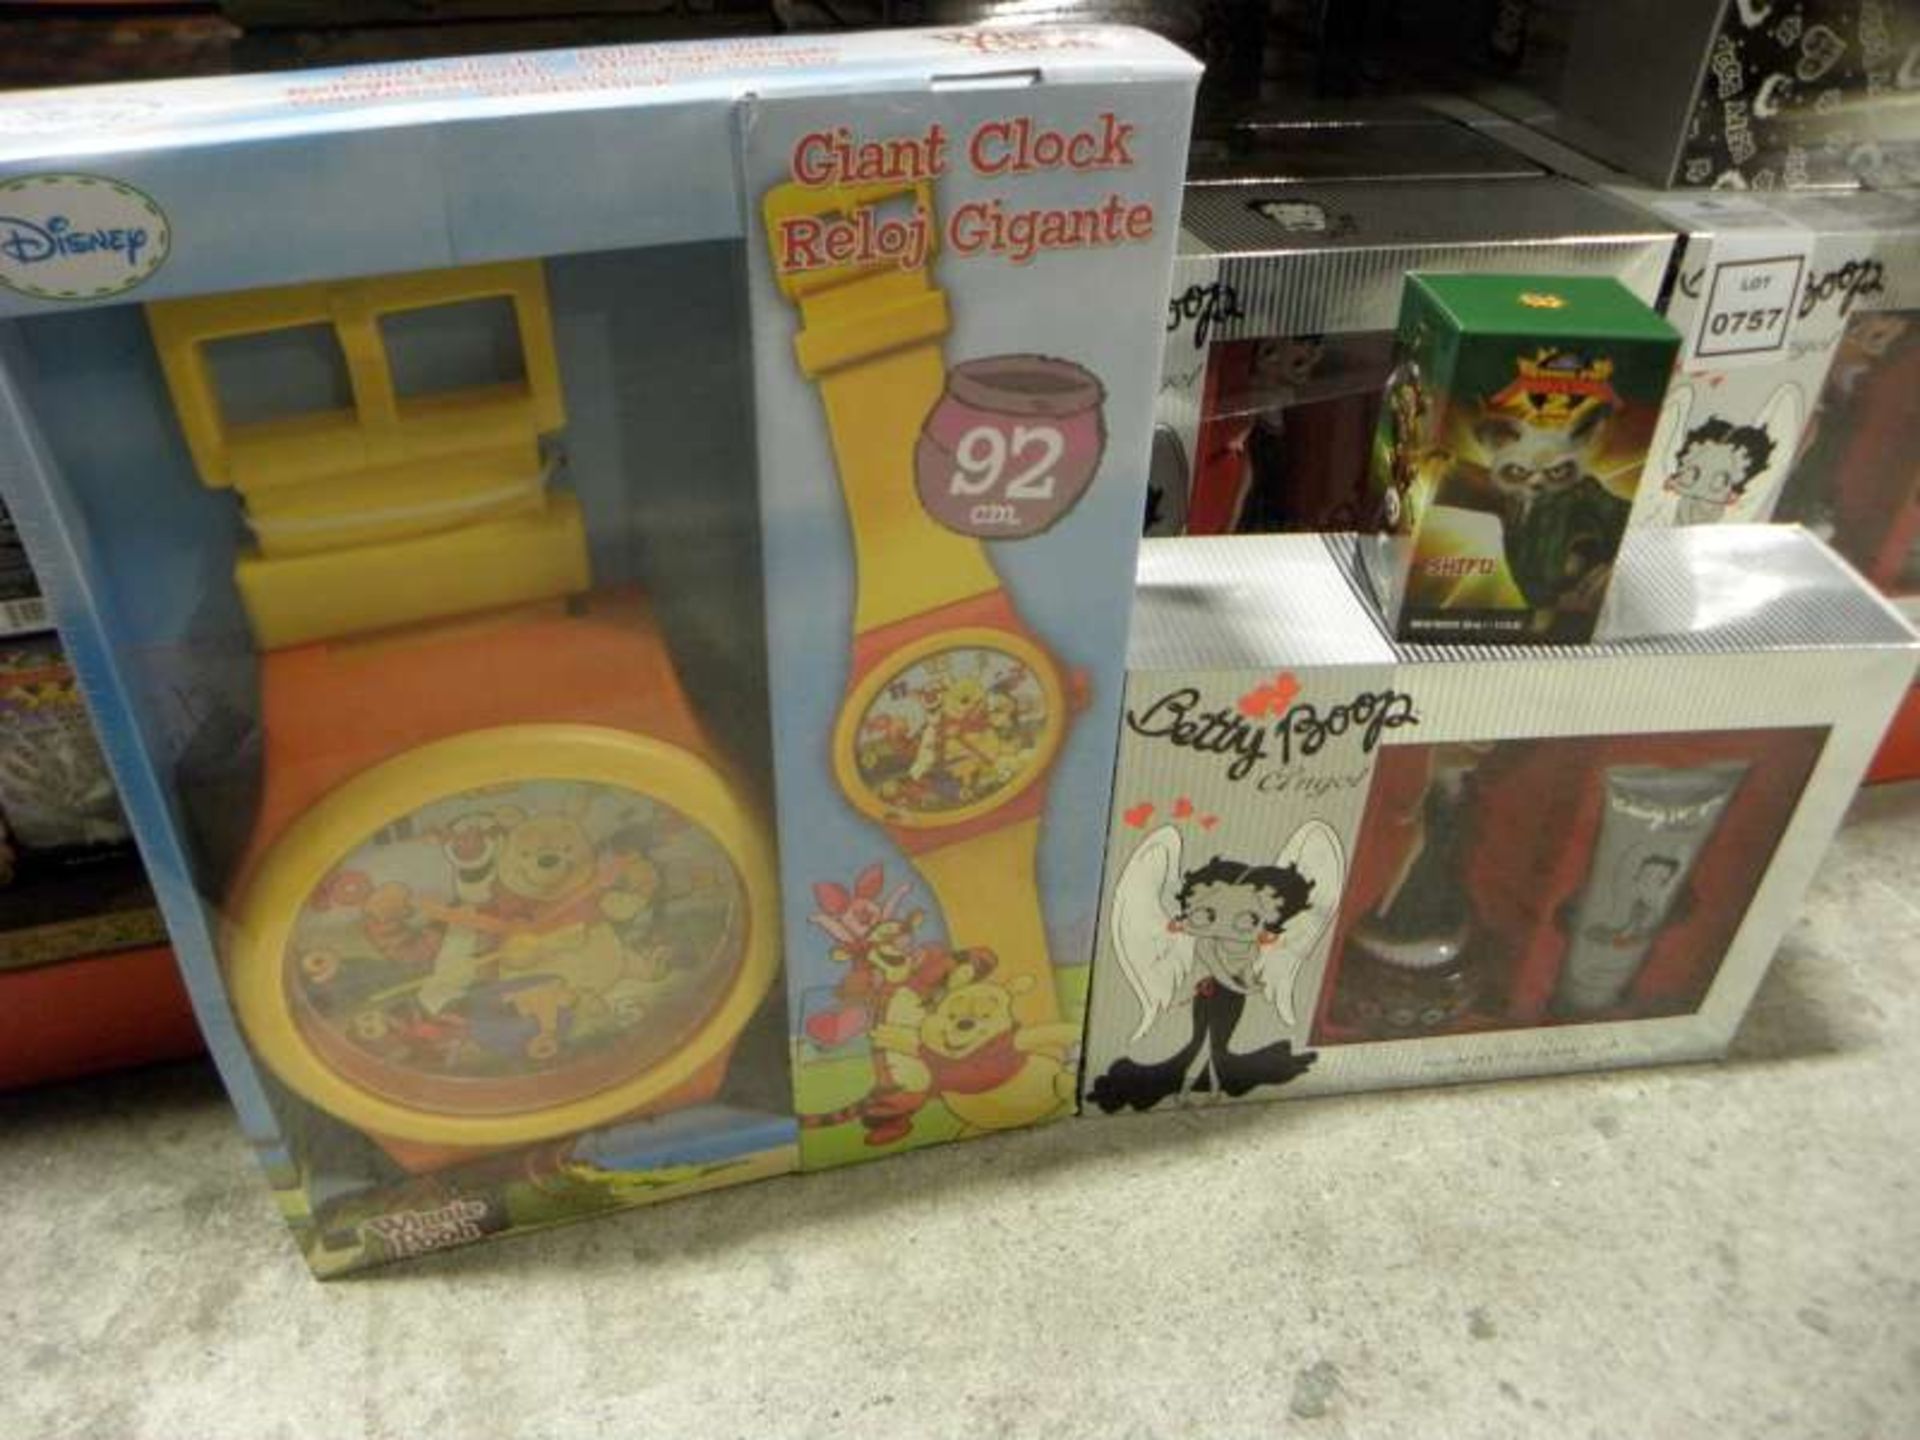 LOT CONTAINING 48 X BETTY BOOP ANGEL GIFT SETS, 10 X DISNEY WINNIE THE POOH GIANT WALL CLOCKS, 96